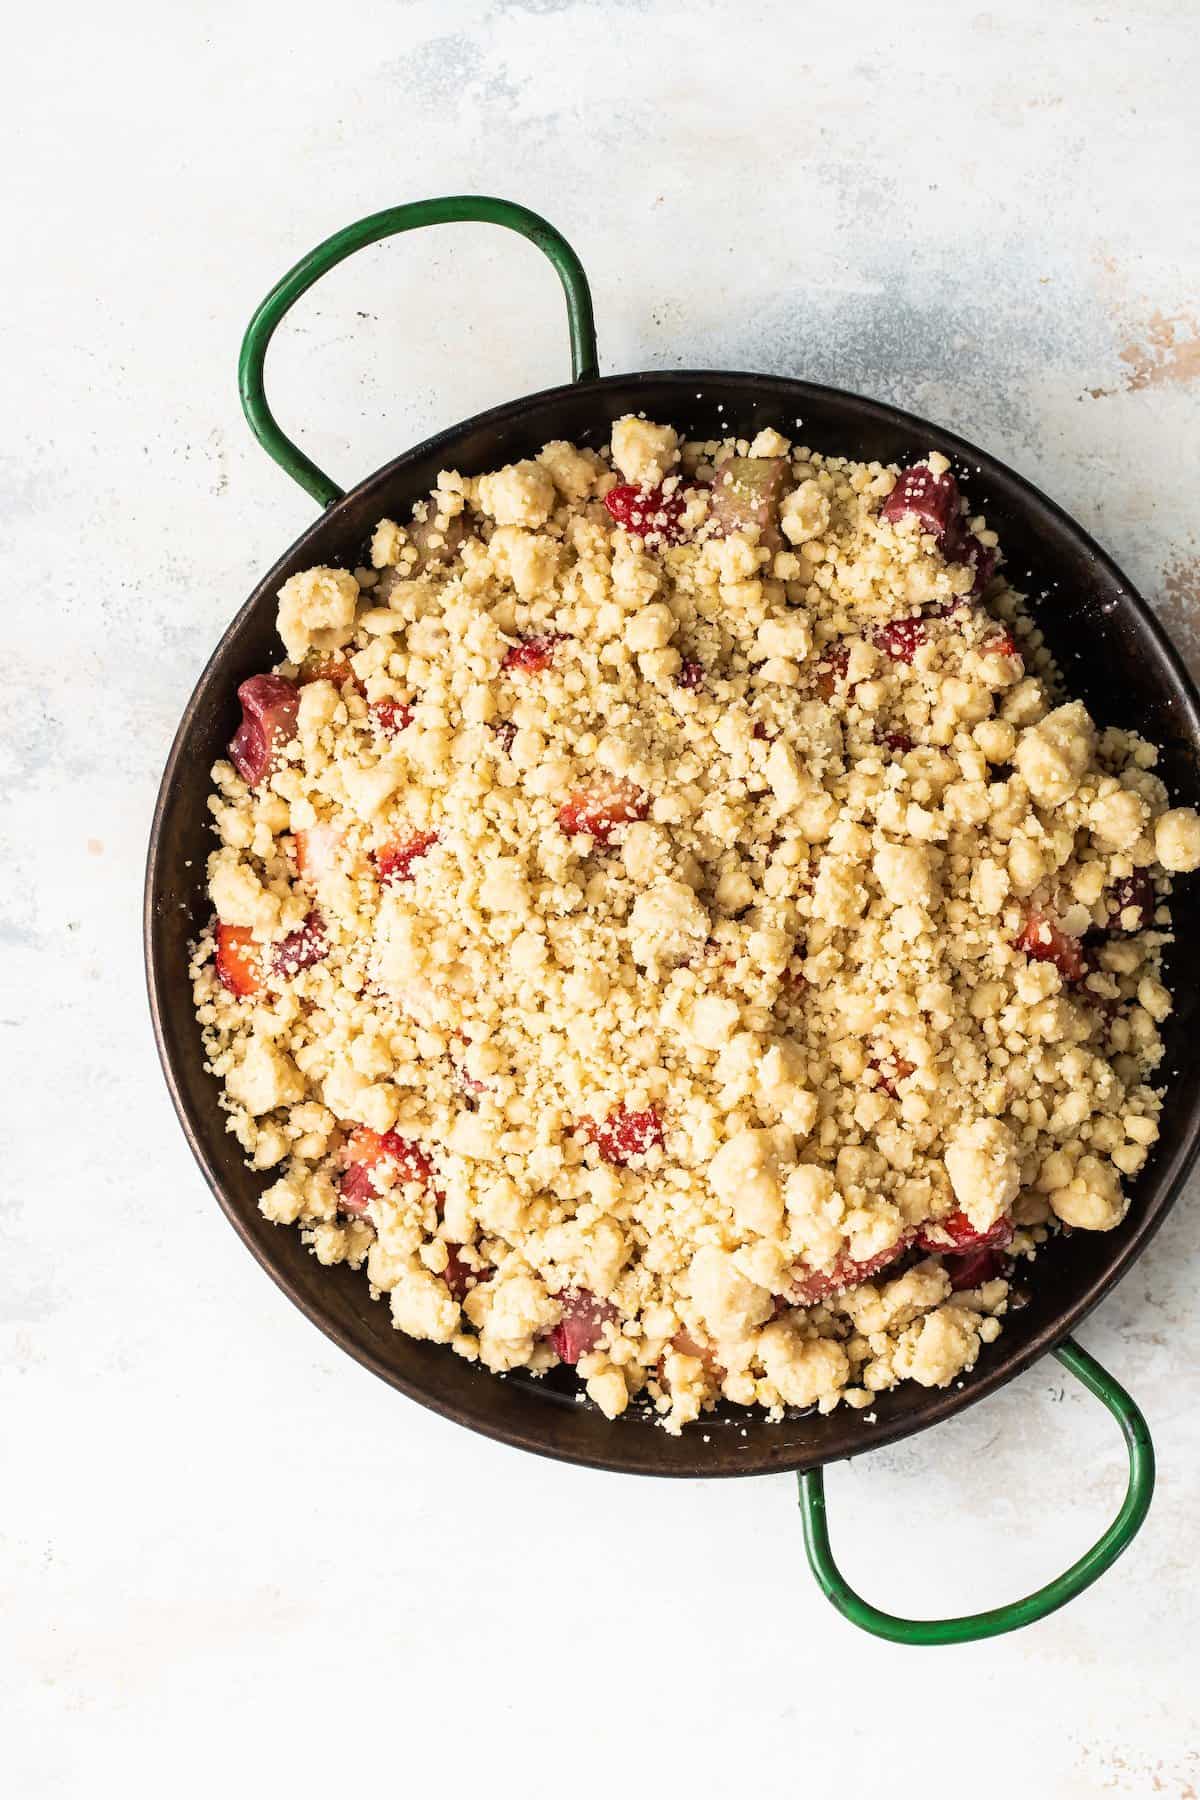 Streusel on top of strawberries and rhubarb.